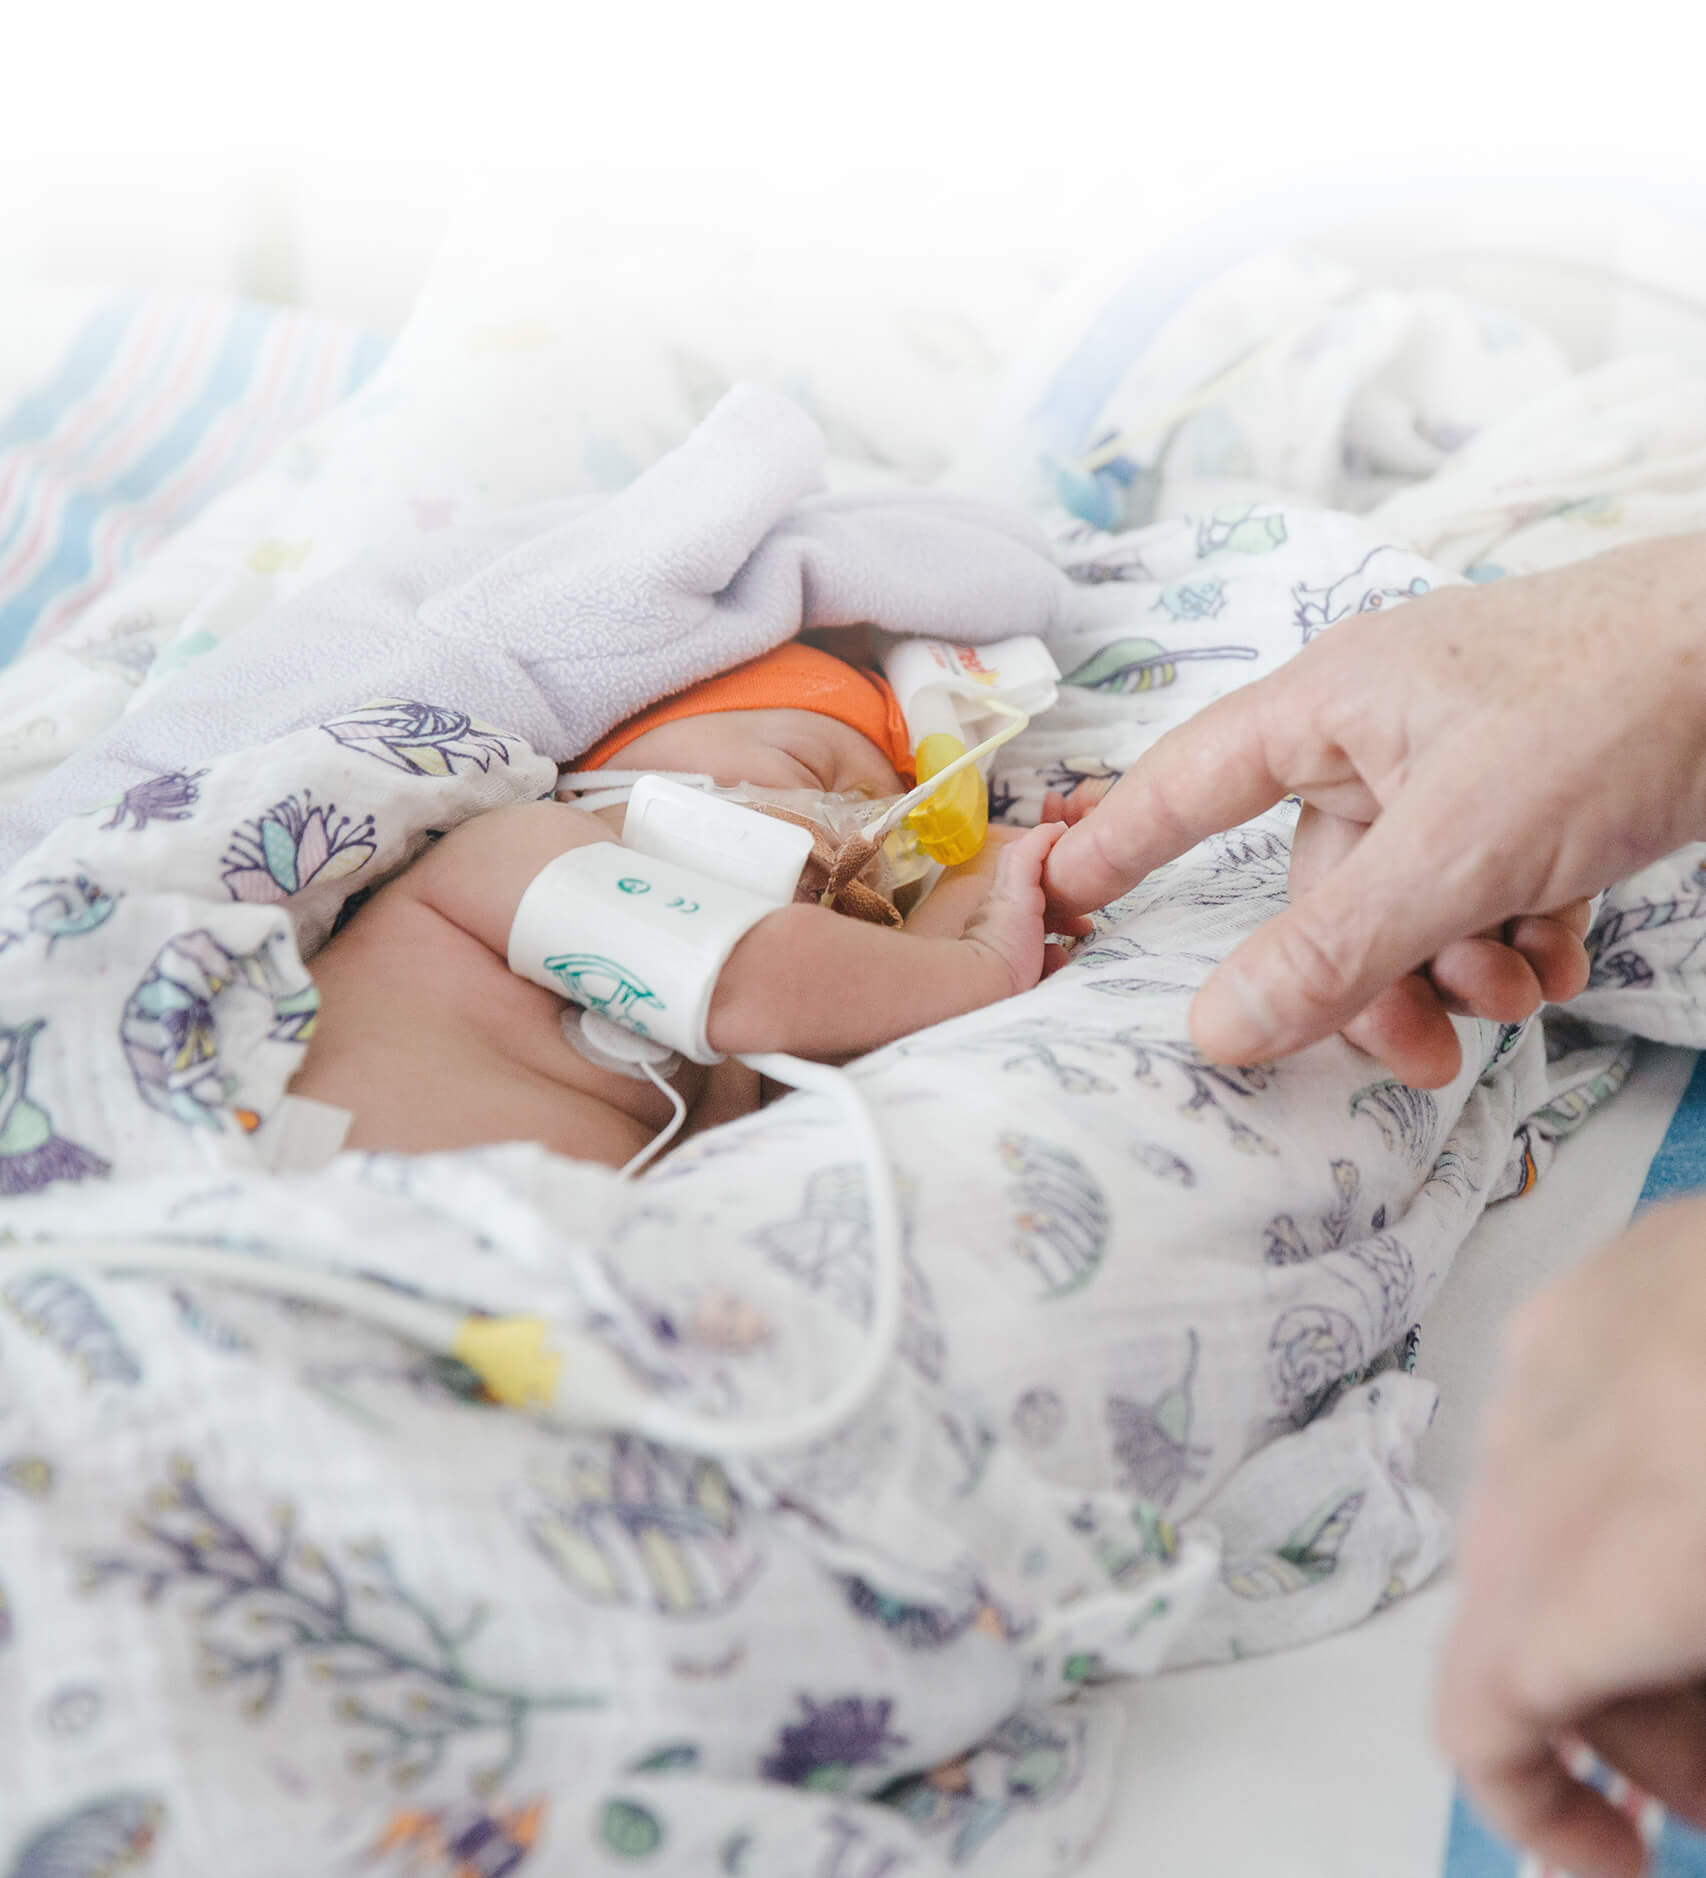 A tiny patient in the CHU Sainte-Justine neonatal intensive care unit.